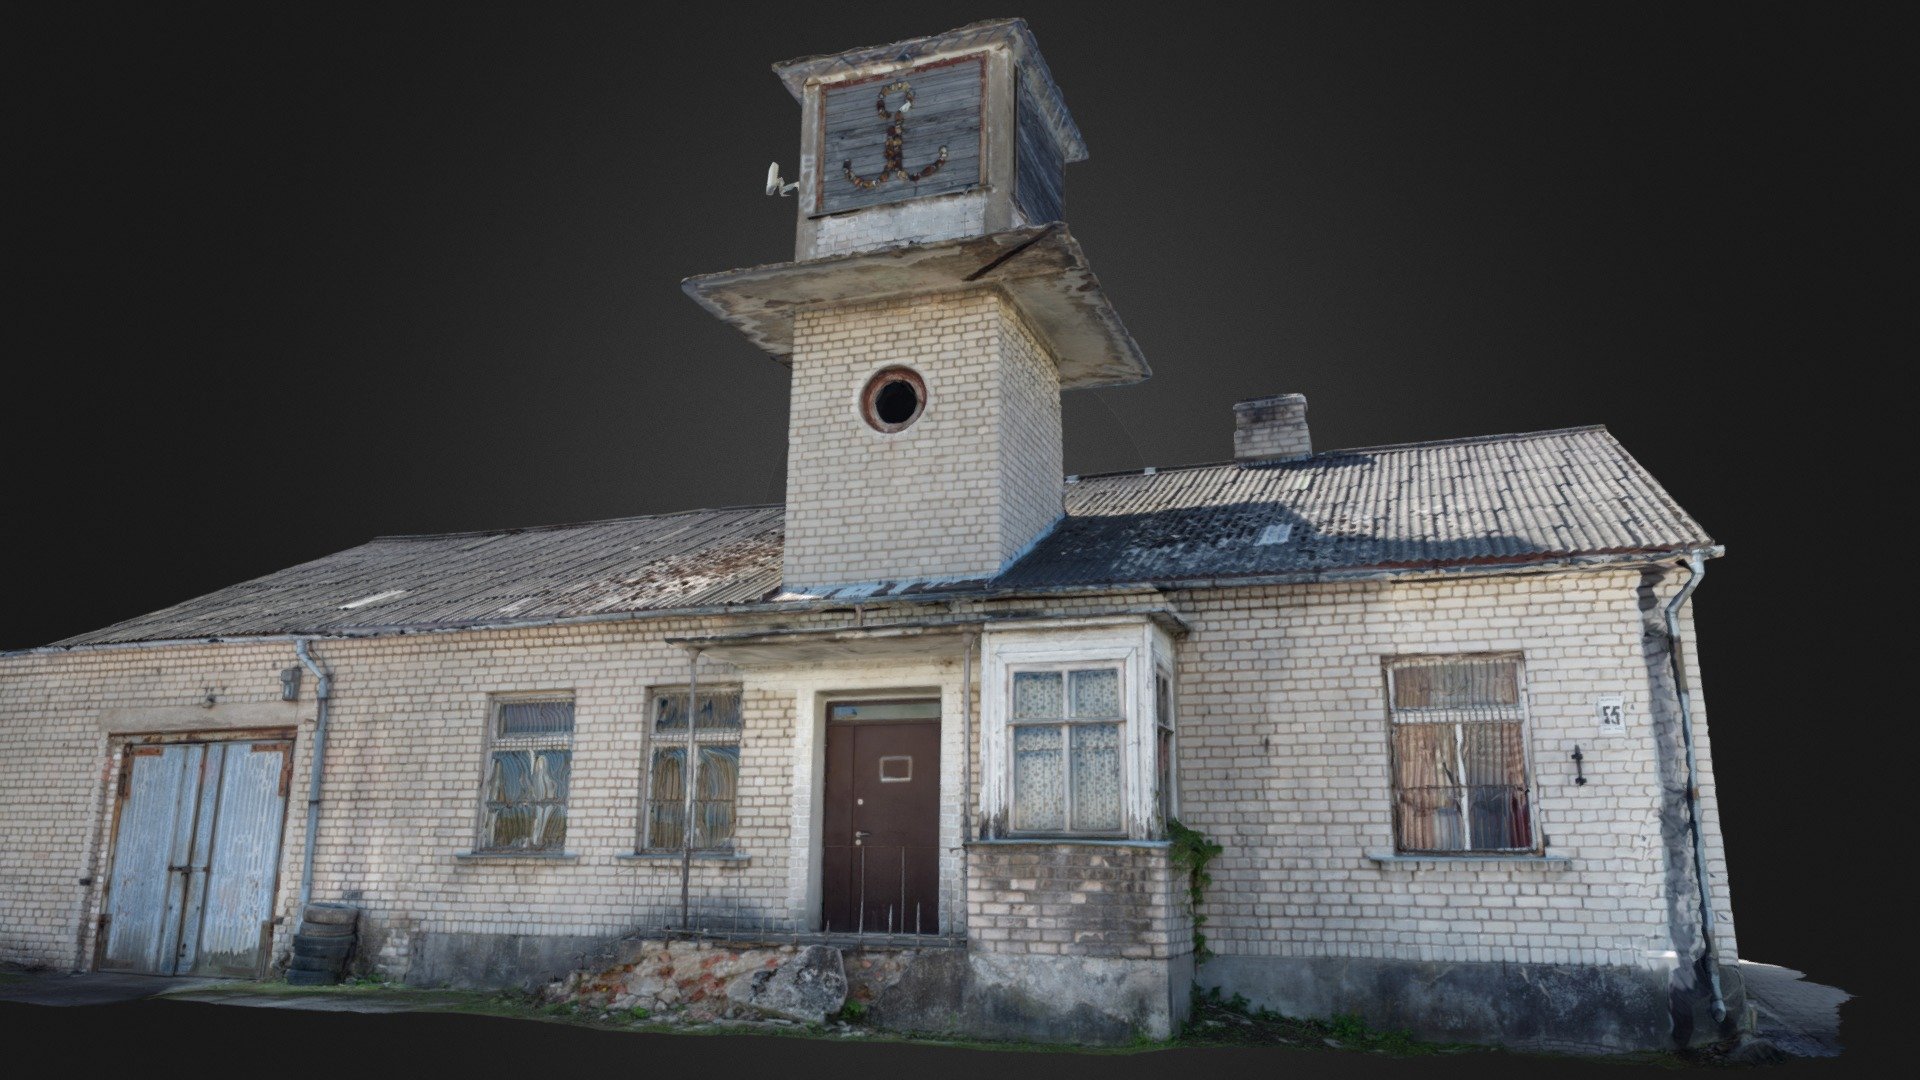 Photoscan of an old building with gray bricks and a tower.

Wooden windows, big wooden door. 

With normal map 3d model